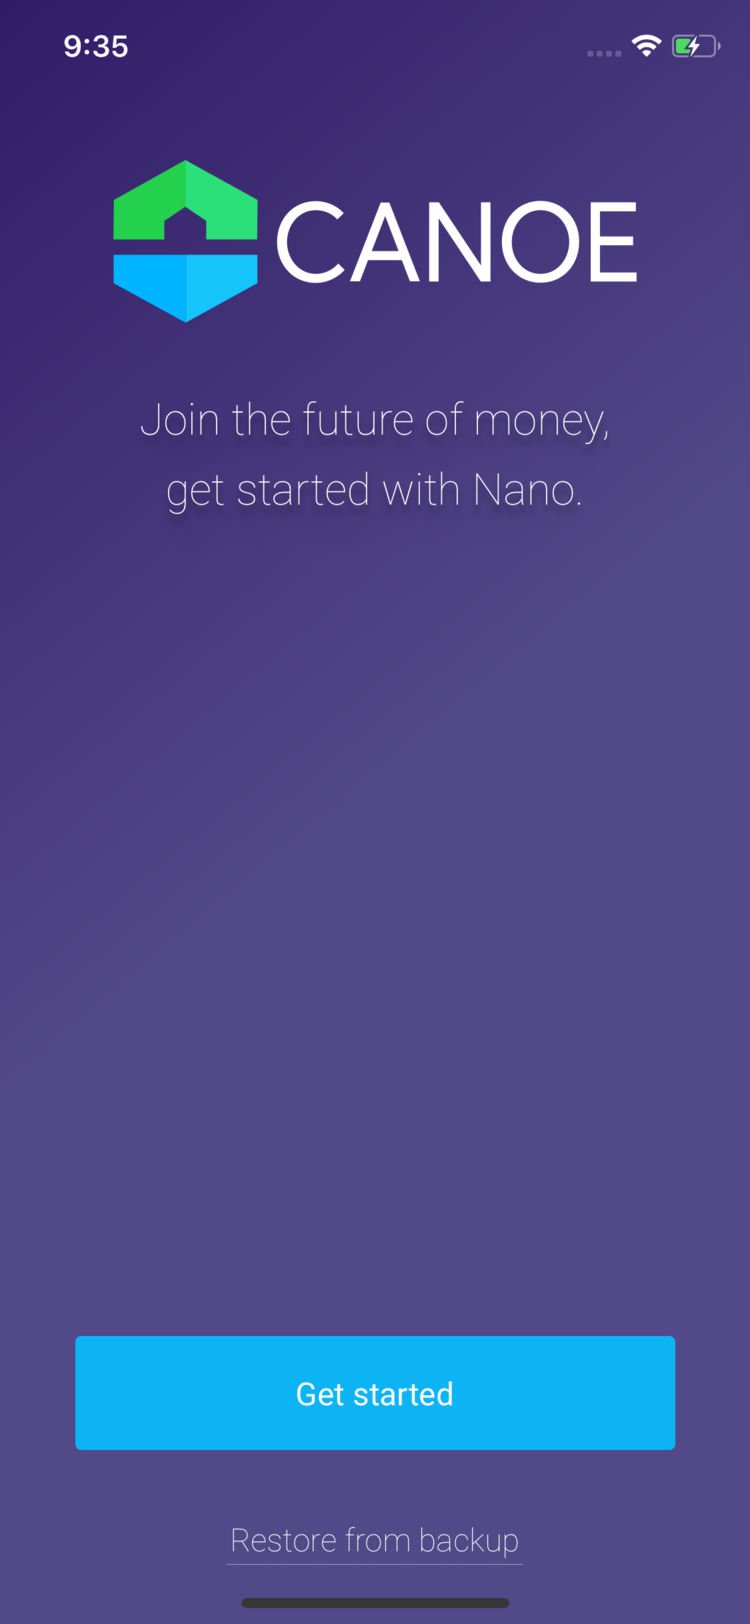 Cover screen of the Canoe wallet